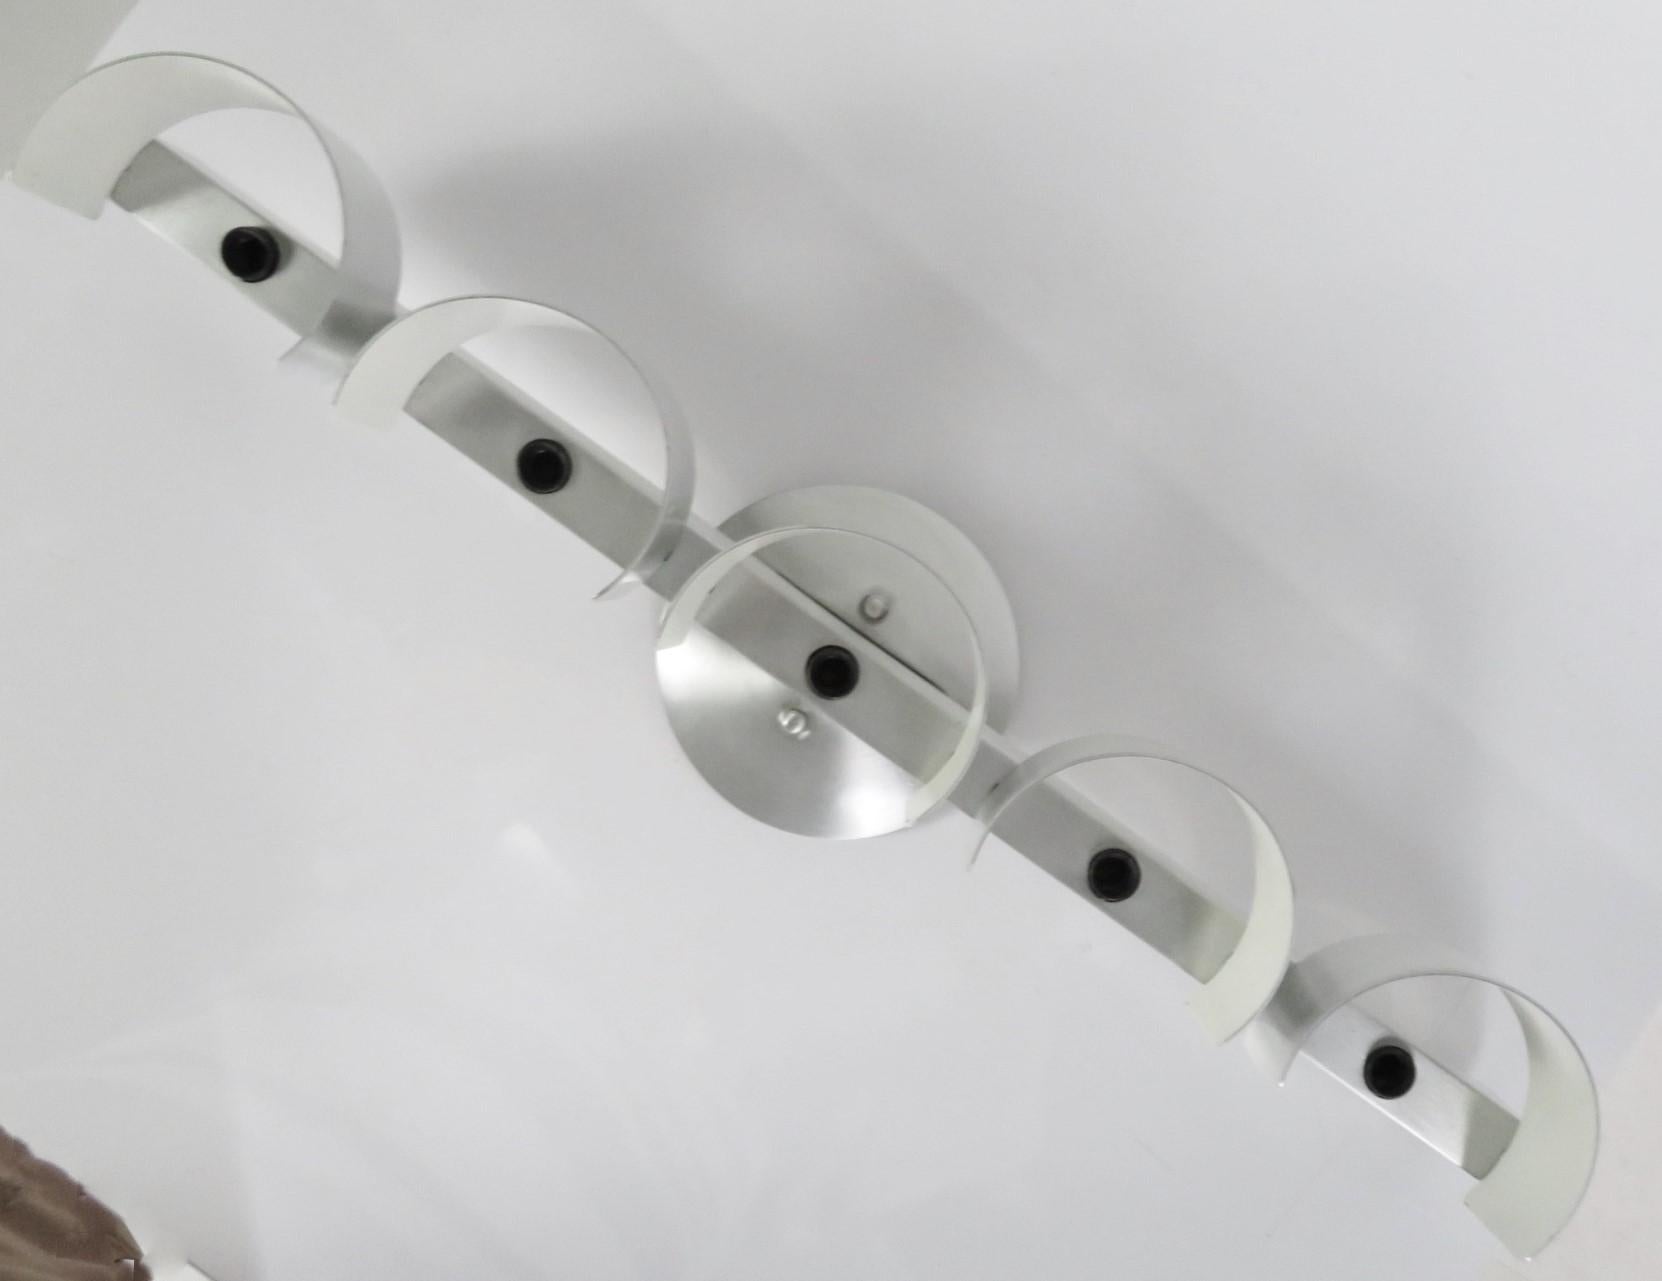 Vintage 1960s wall light in brush aluminum and semi-circle with the reflectible insides in white. Perfect for over the sink bathroom light or vanity. In very good condition, probably never used or used for a short amount of time. Very minor scrape,